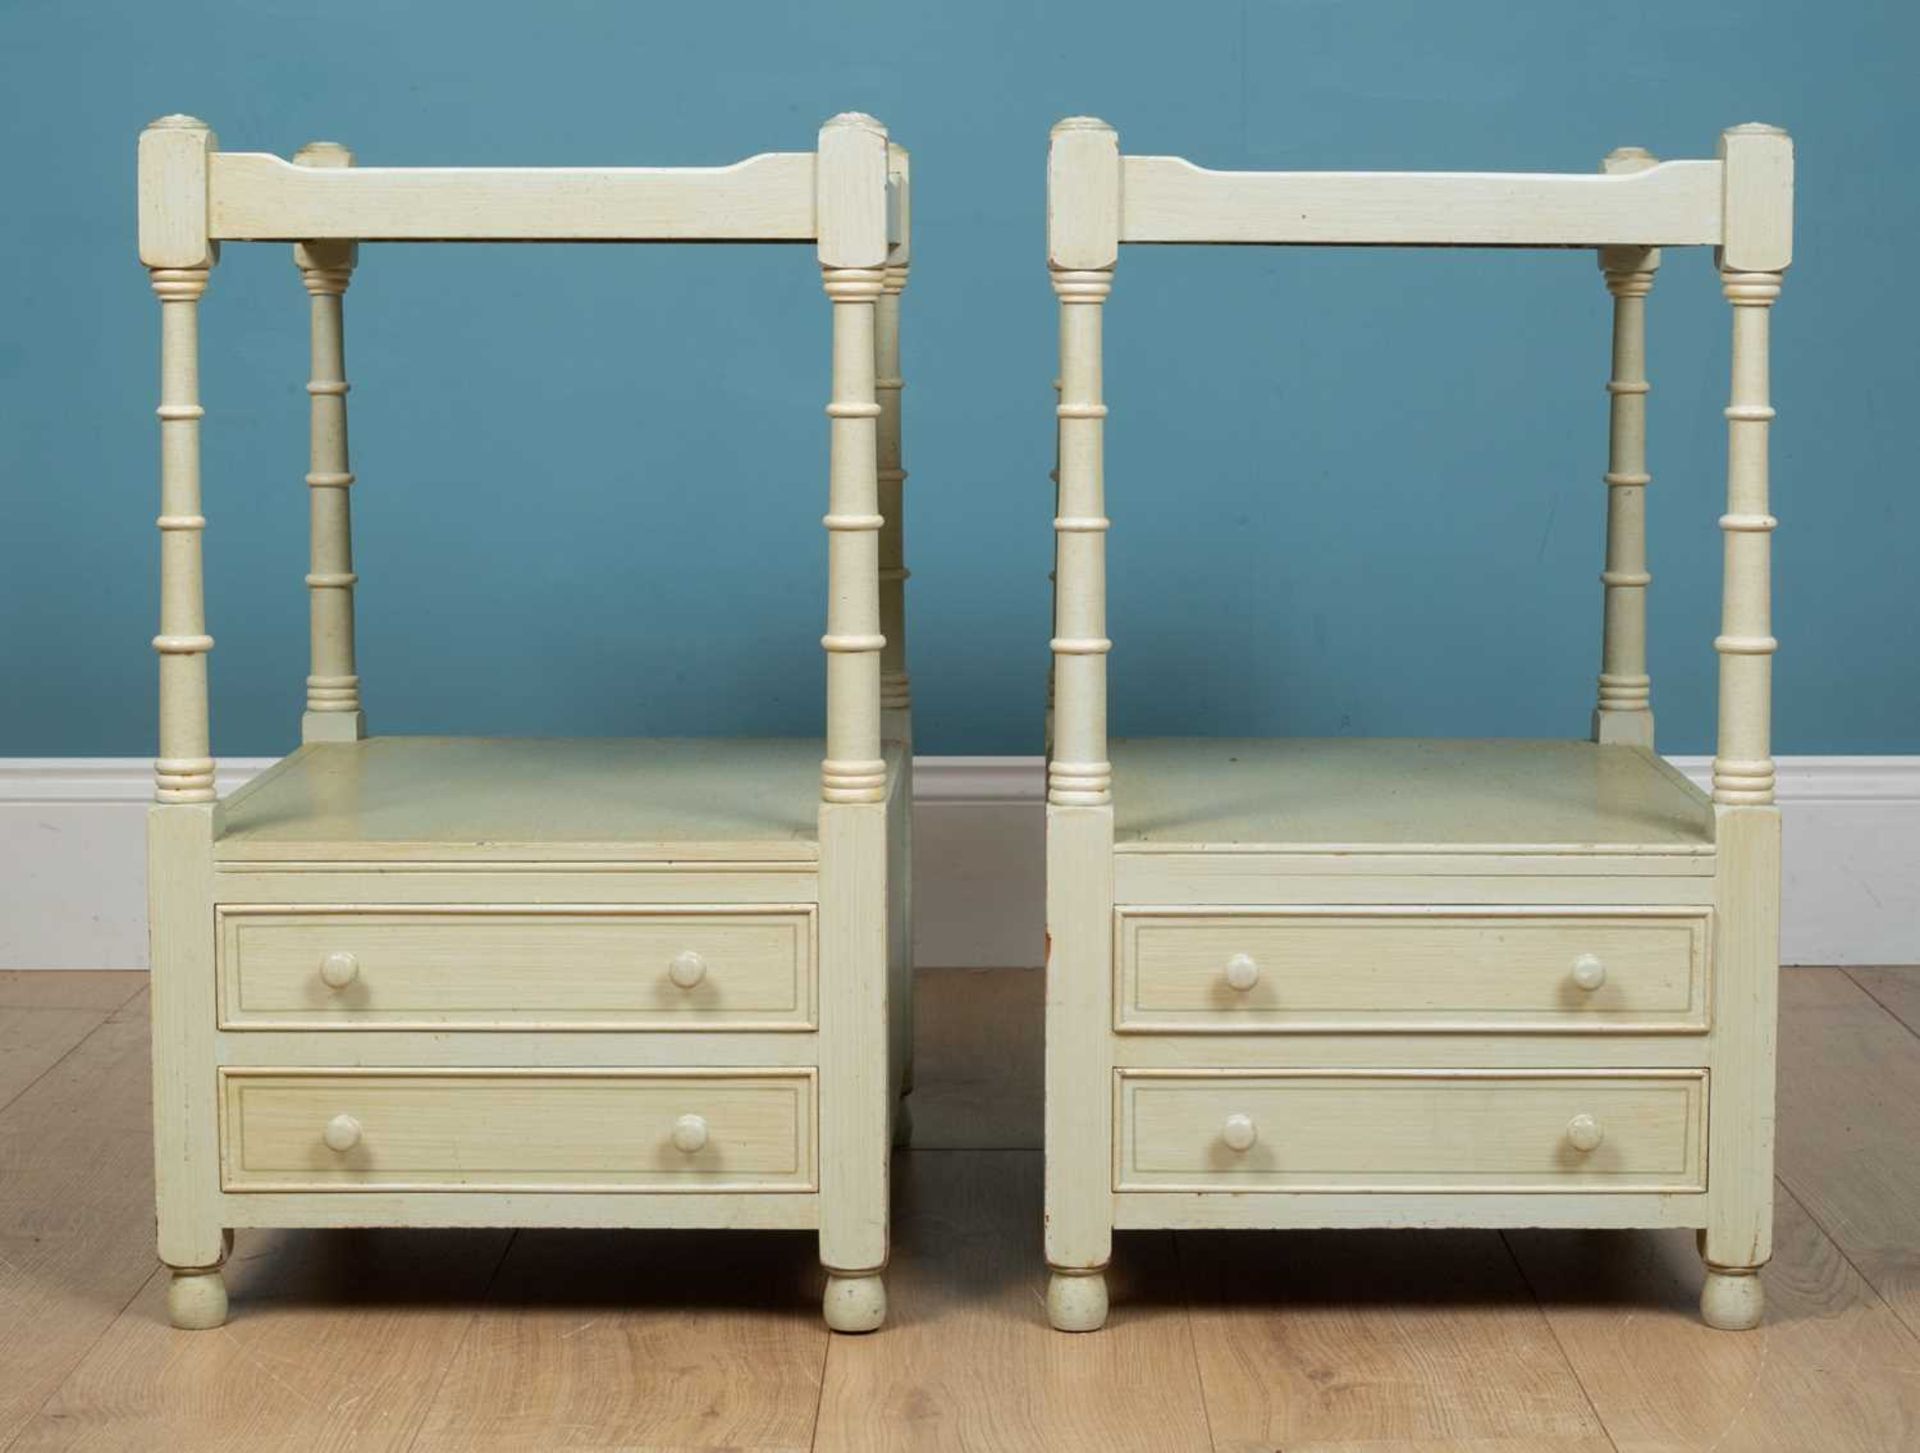 A pair of modern painted two-tier bedside tables